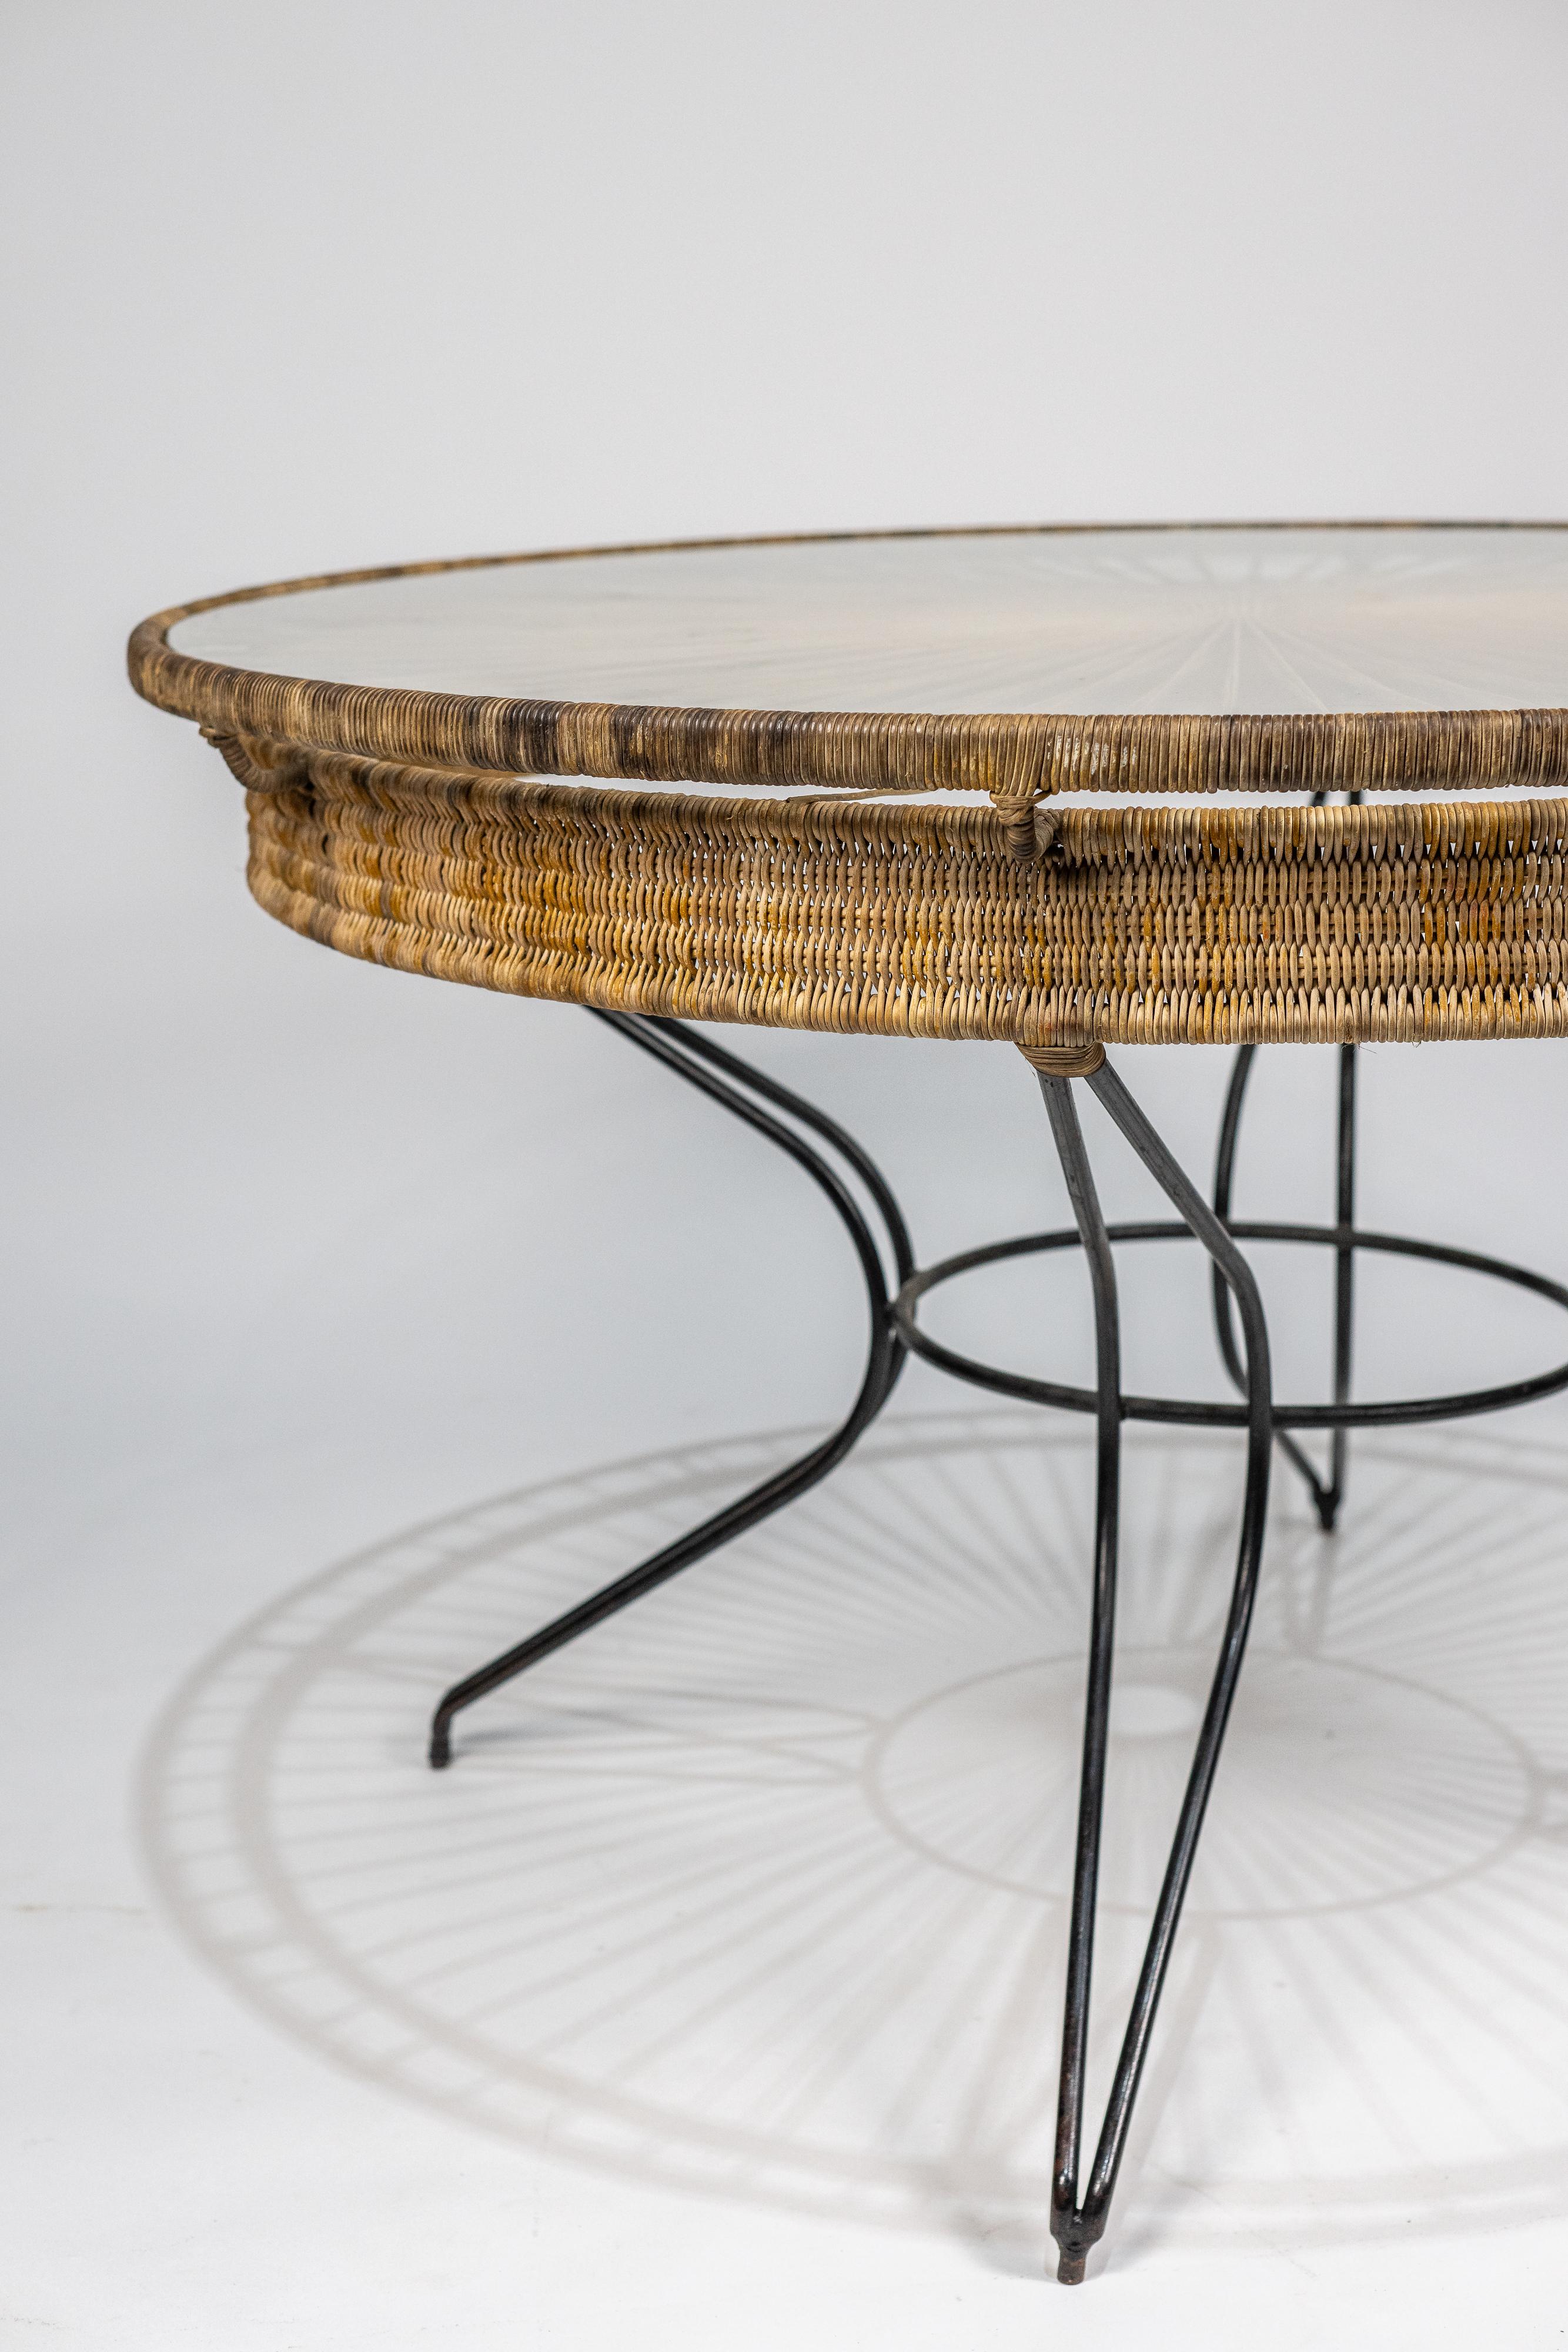 The Carlo Hauner table is an emblematic design piece dating from the 1950s. It has an elegant and timeless aesthetic. This round dining table is designed with a blend of high-quality materials, including black painted iron, wicker and glass.

With